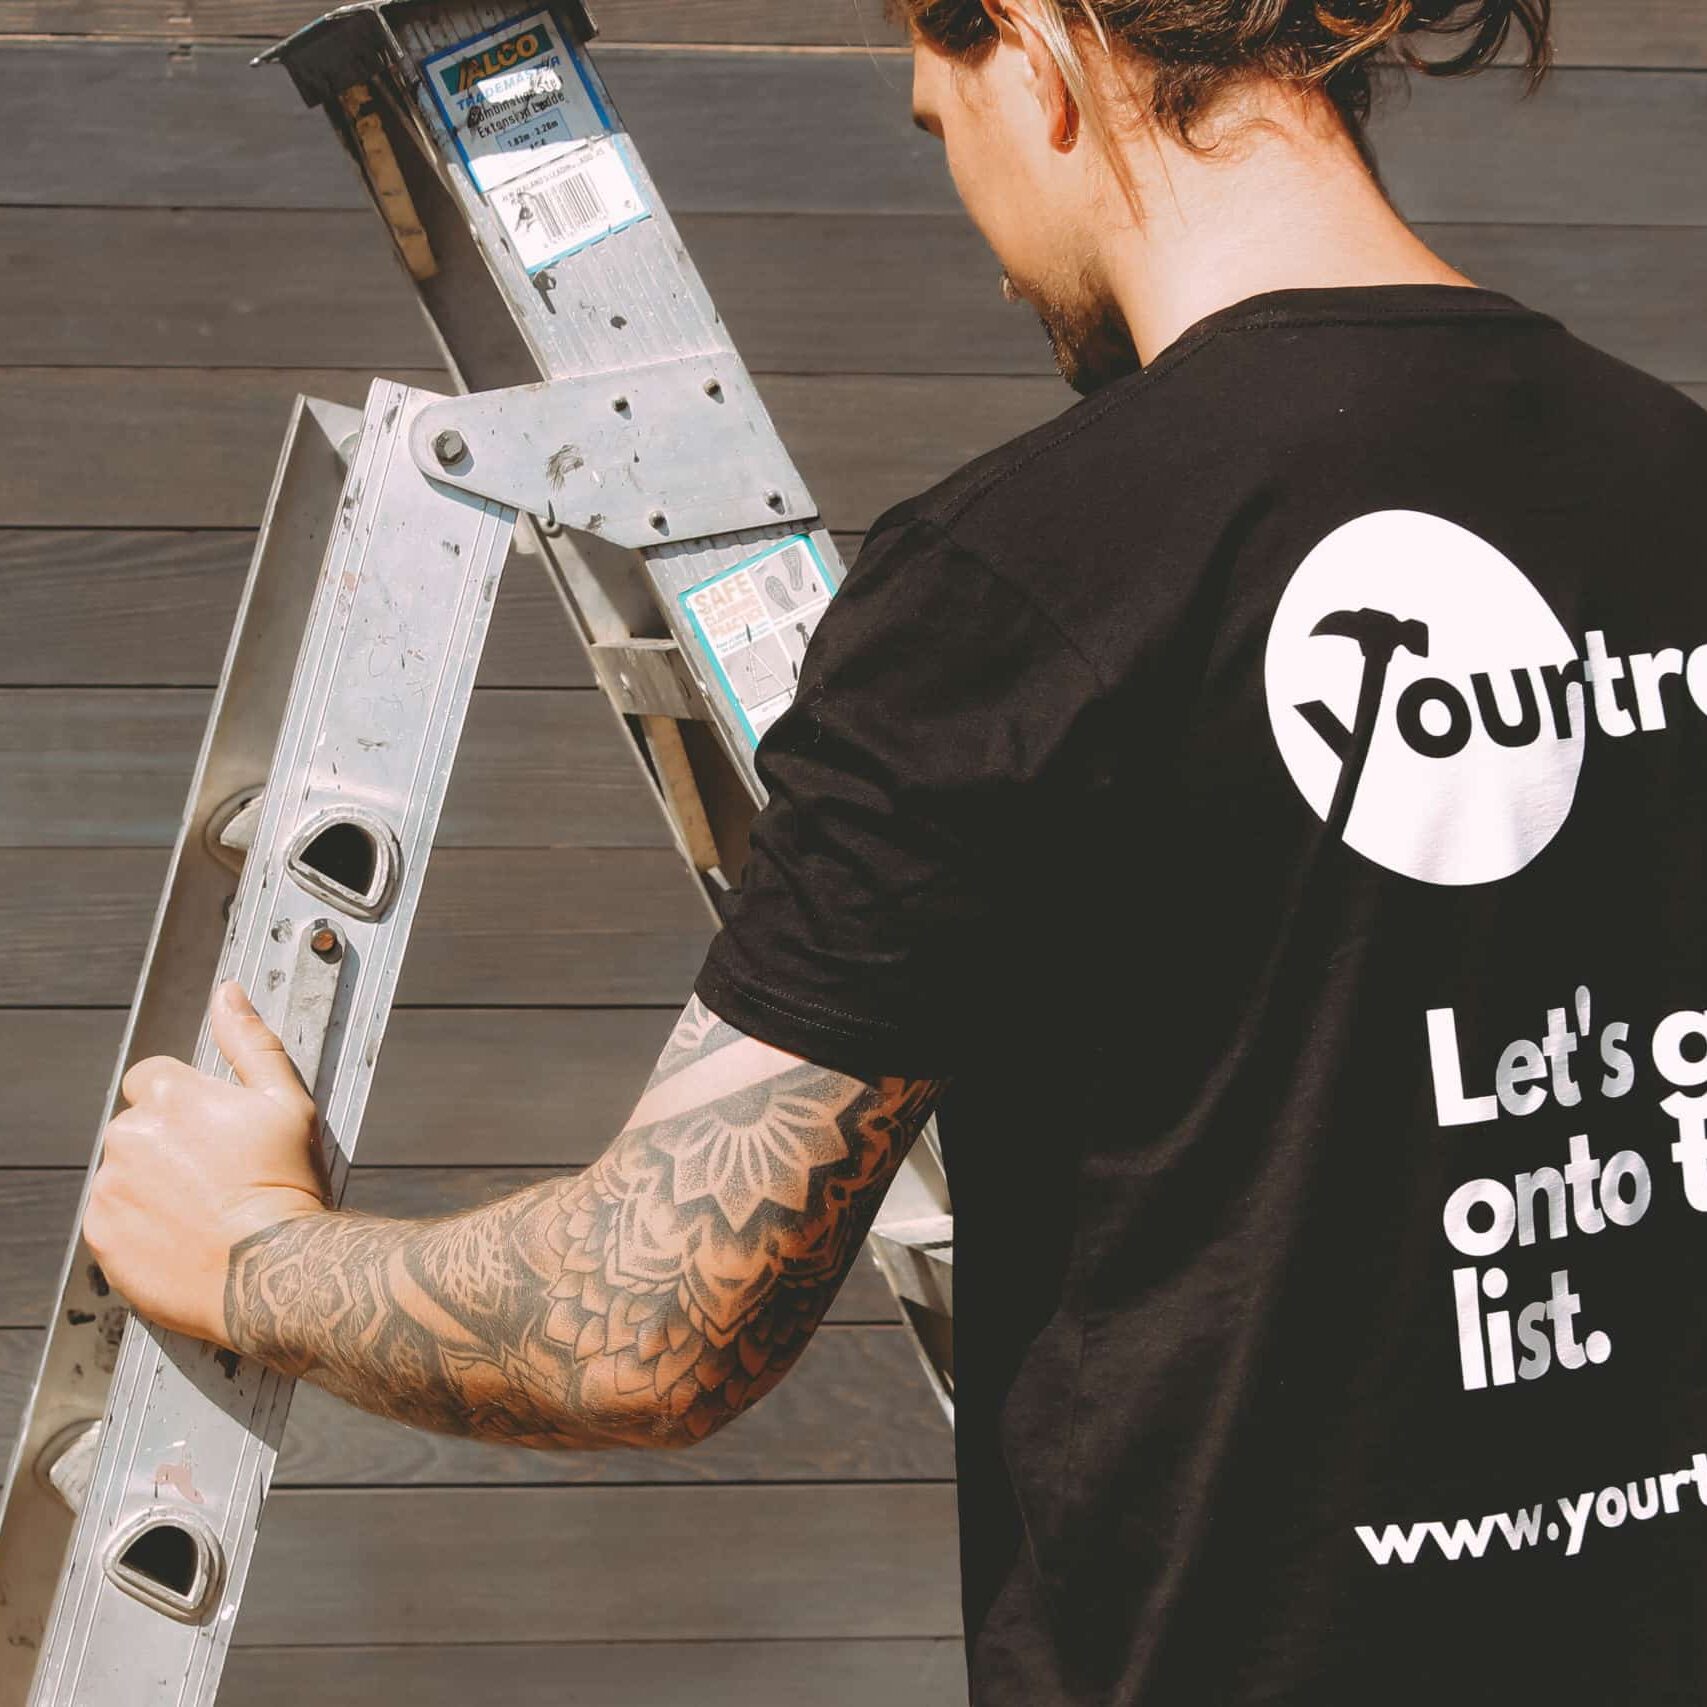 Auckland home renovation - Yourtradie worker using a ladder